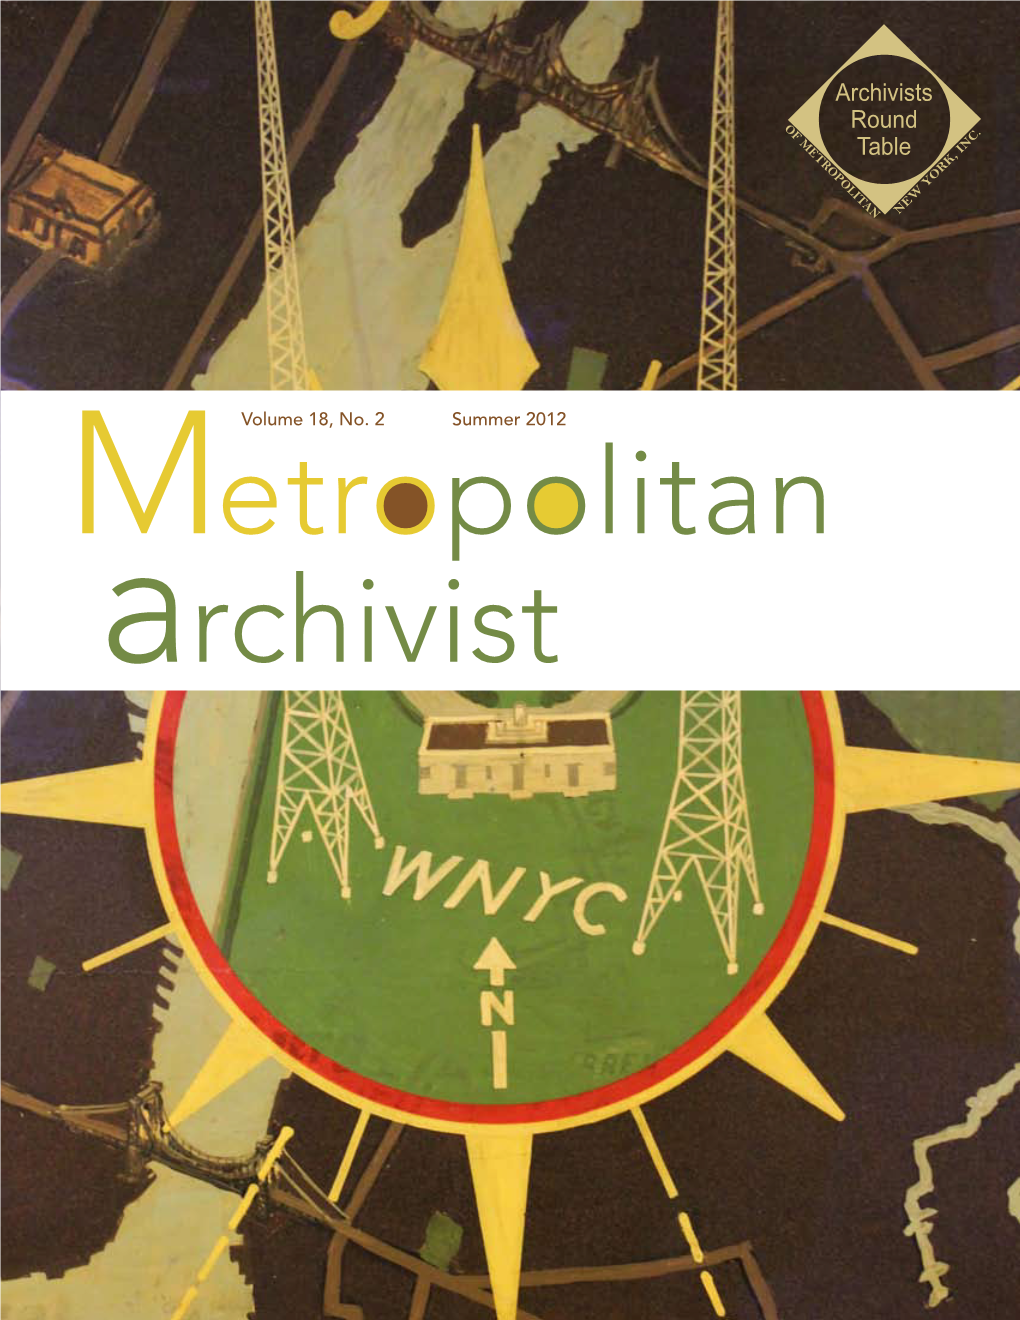 Metropolitan Archivist Is to Serve Members of the Archivists Round Table of Metropolitan Features Editor New York (ART) By